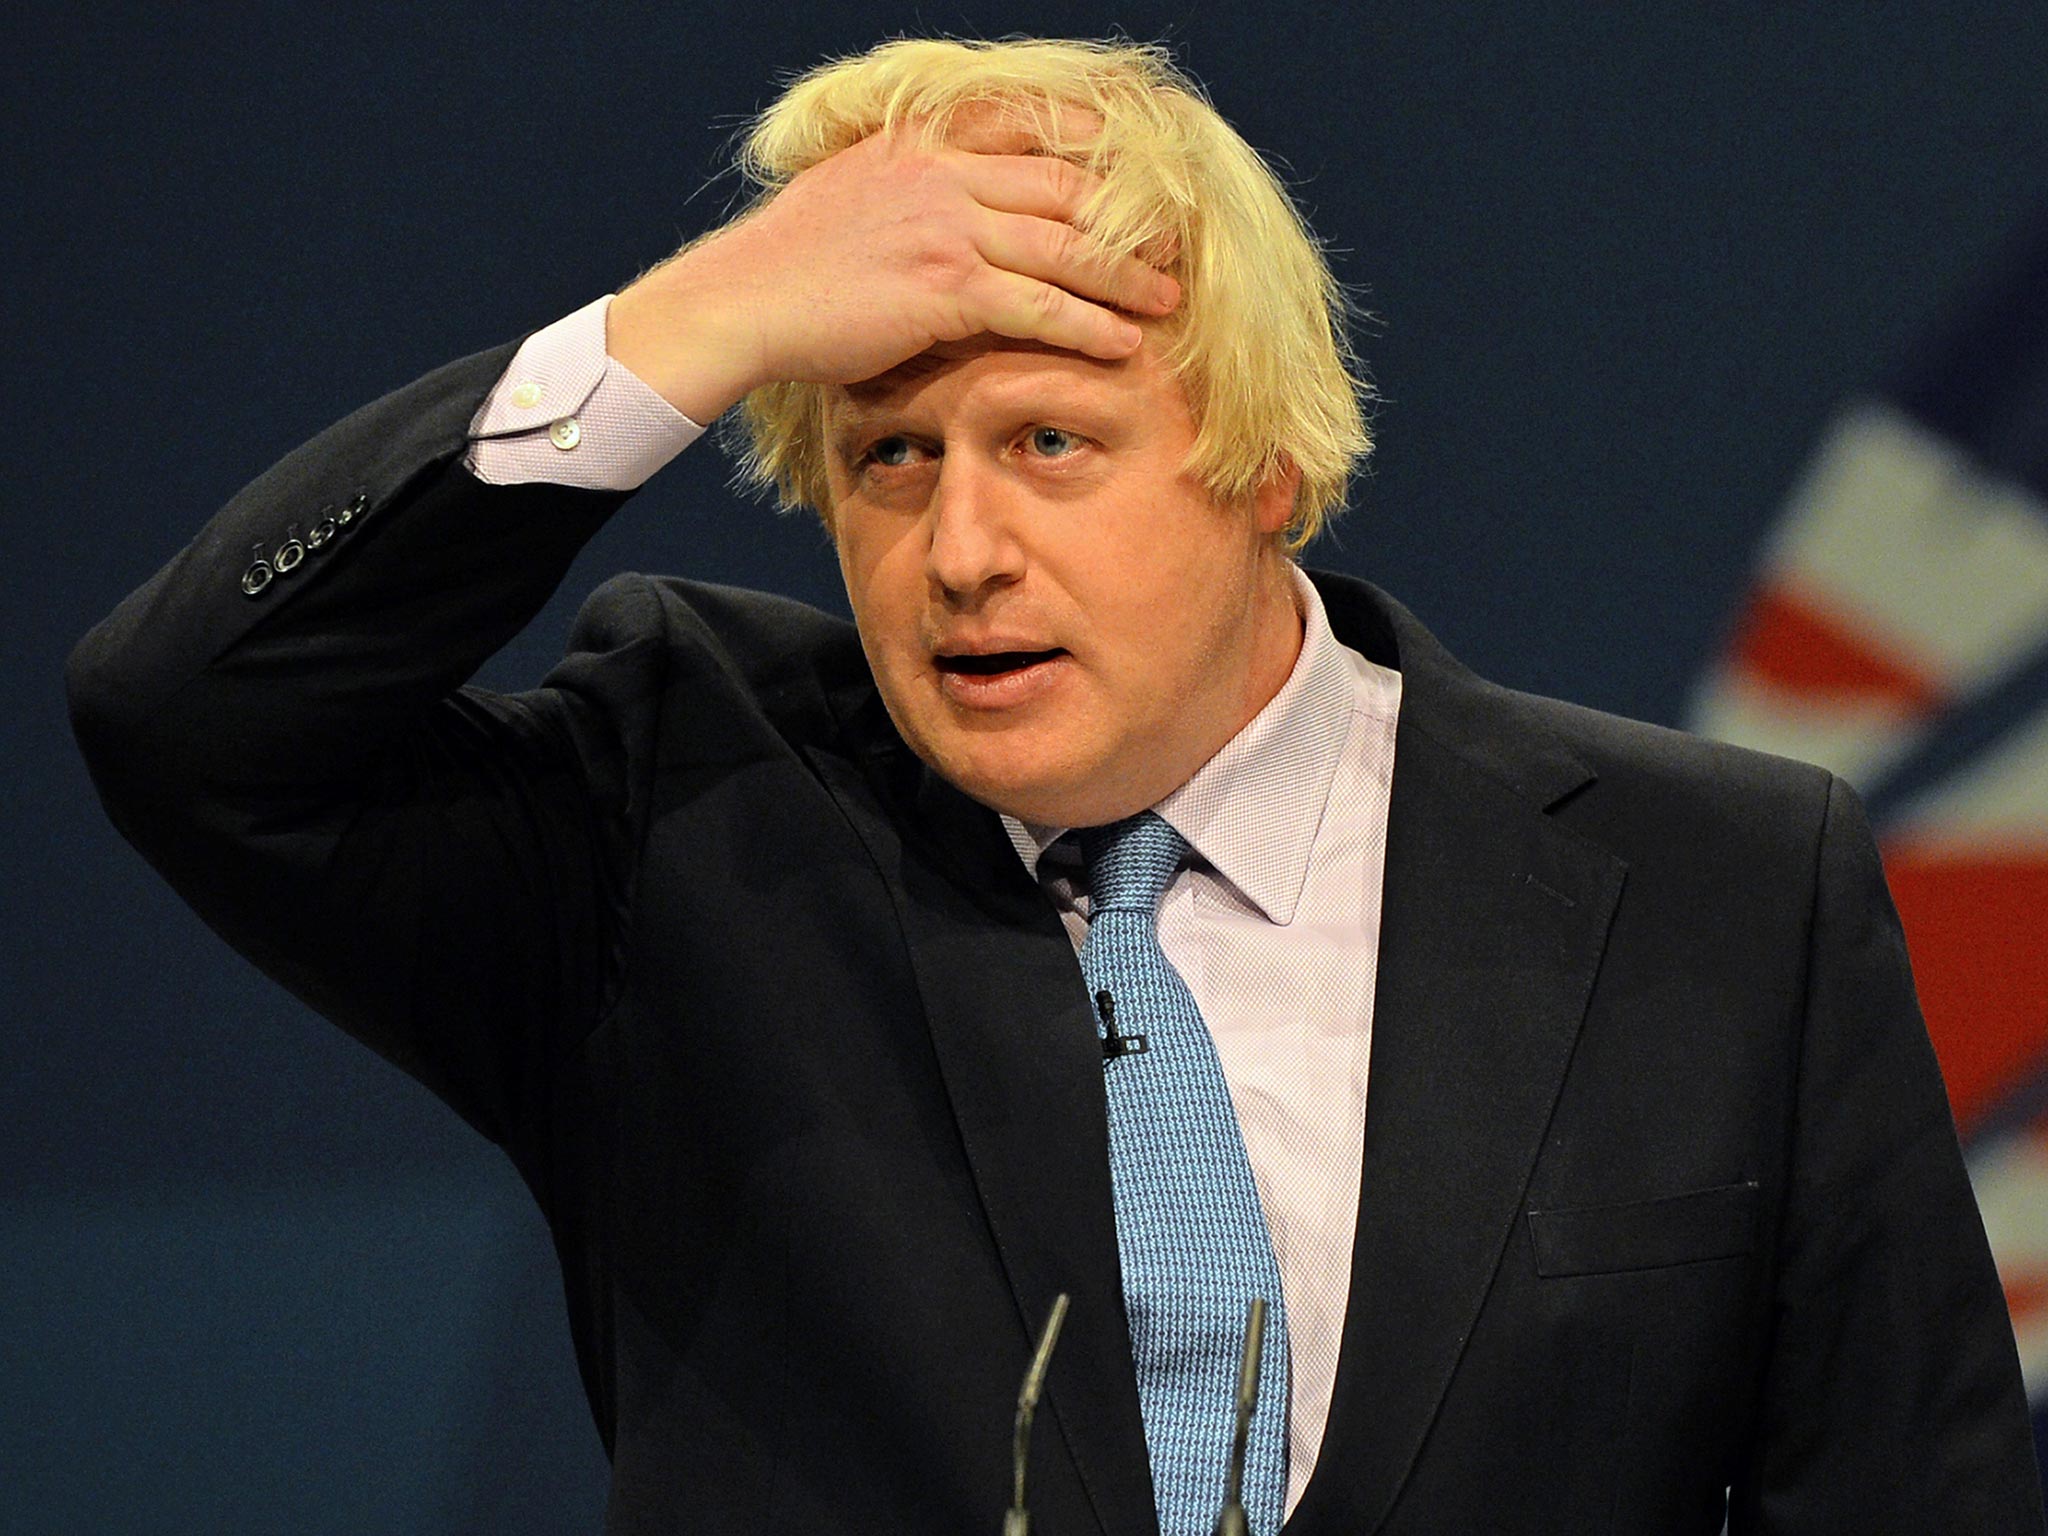 London Mayor Boris Johnson has said that he does not want to become the Tory party leader